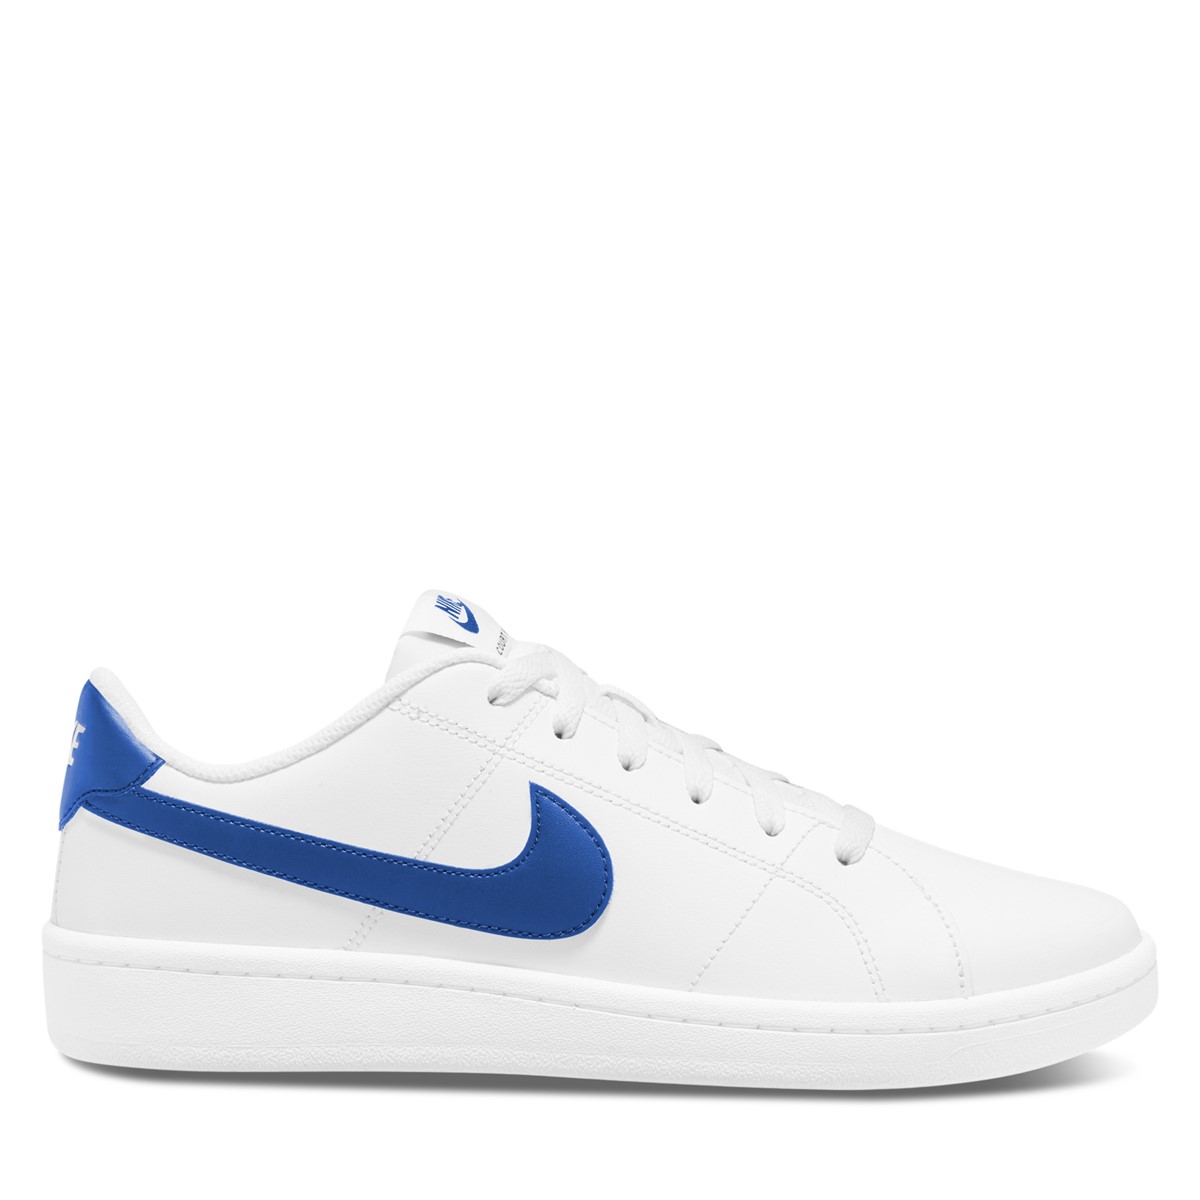 Men's Court Royale 2 Low Sneakers in White/Blue